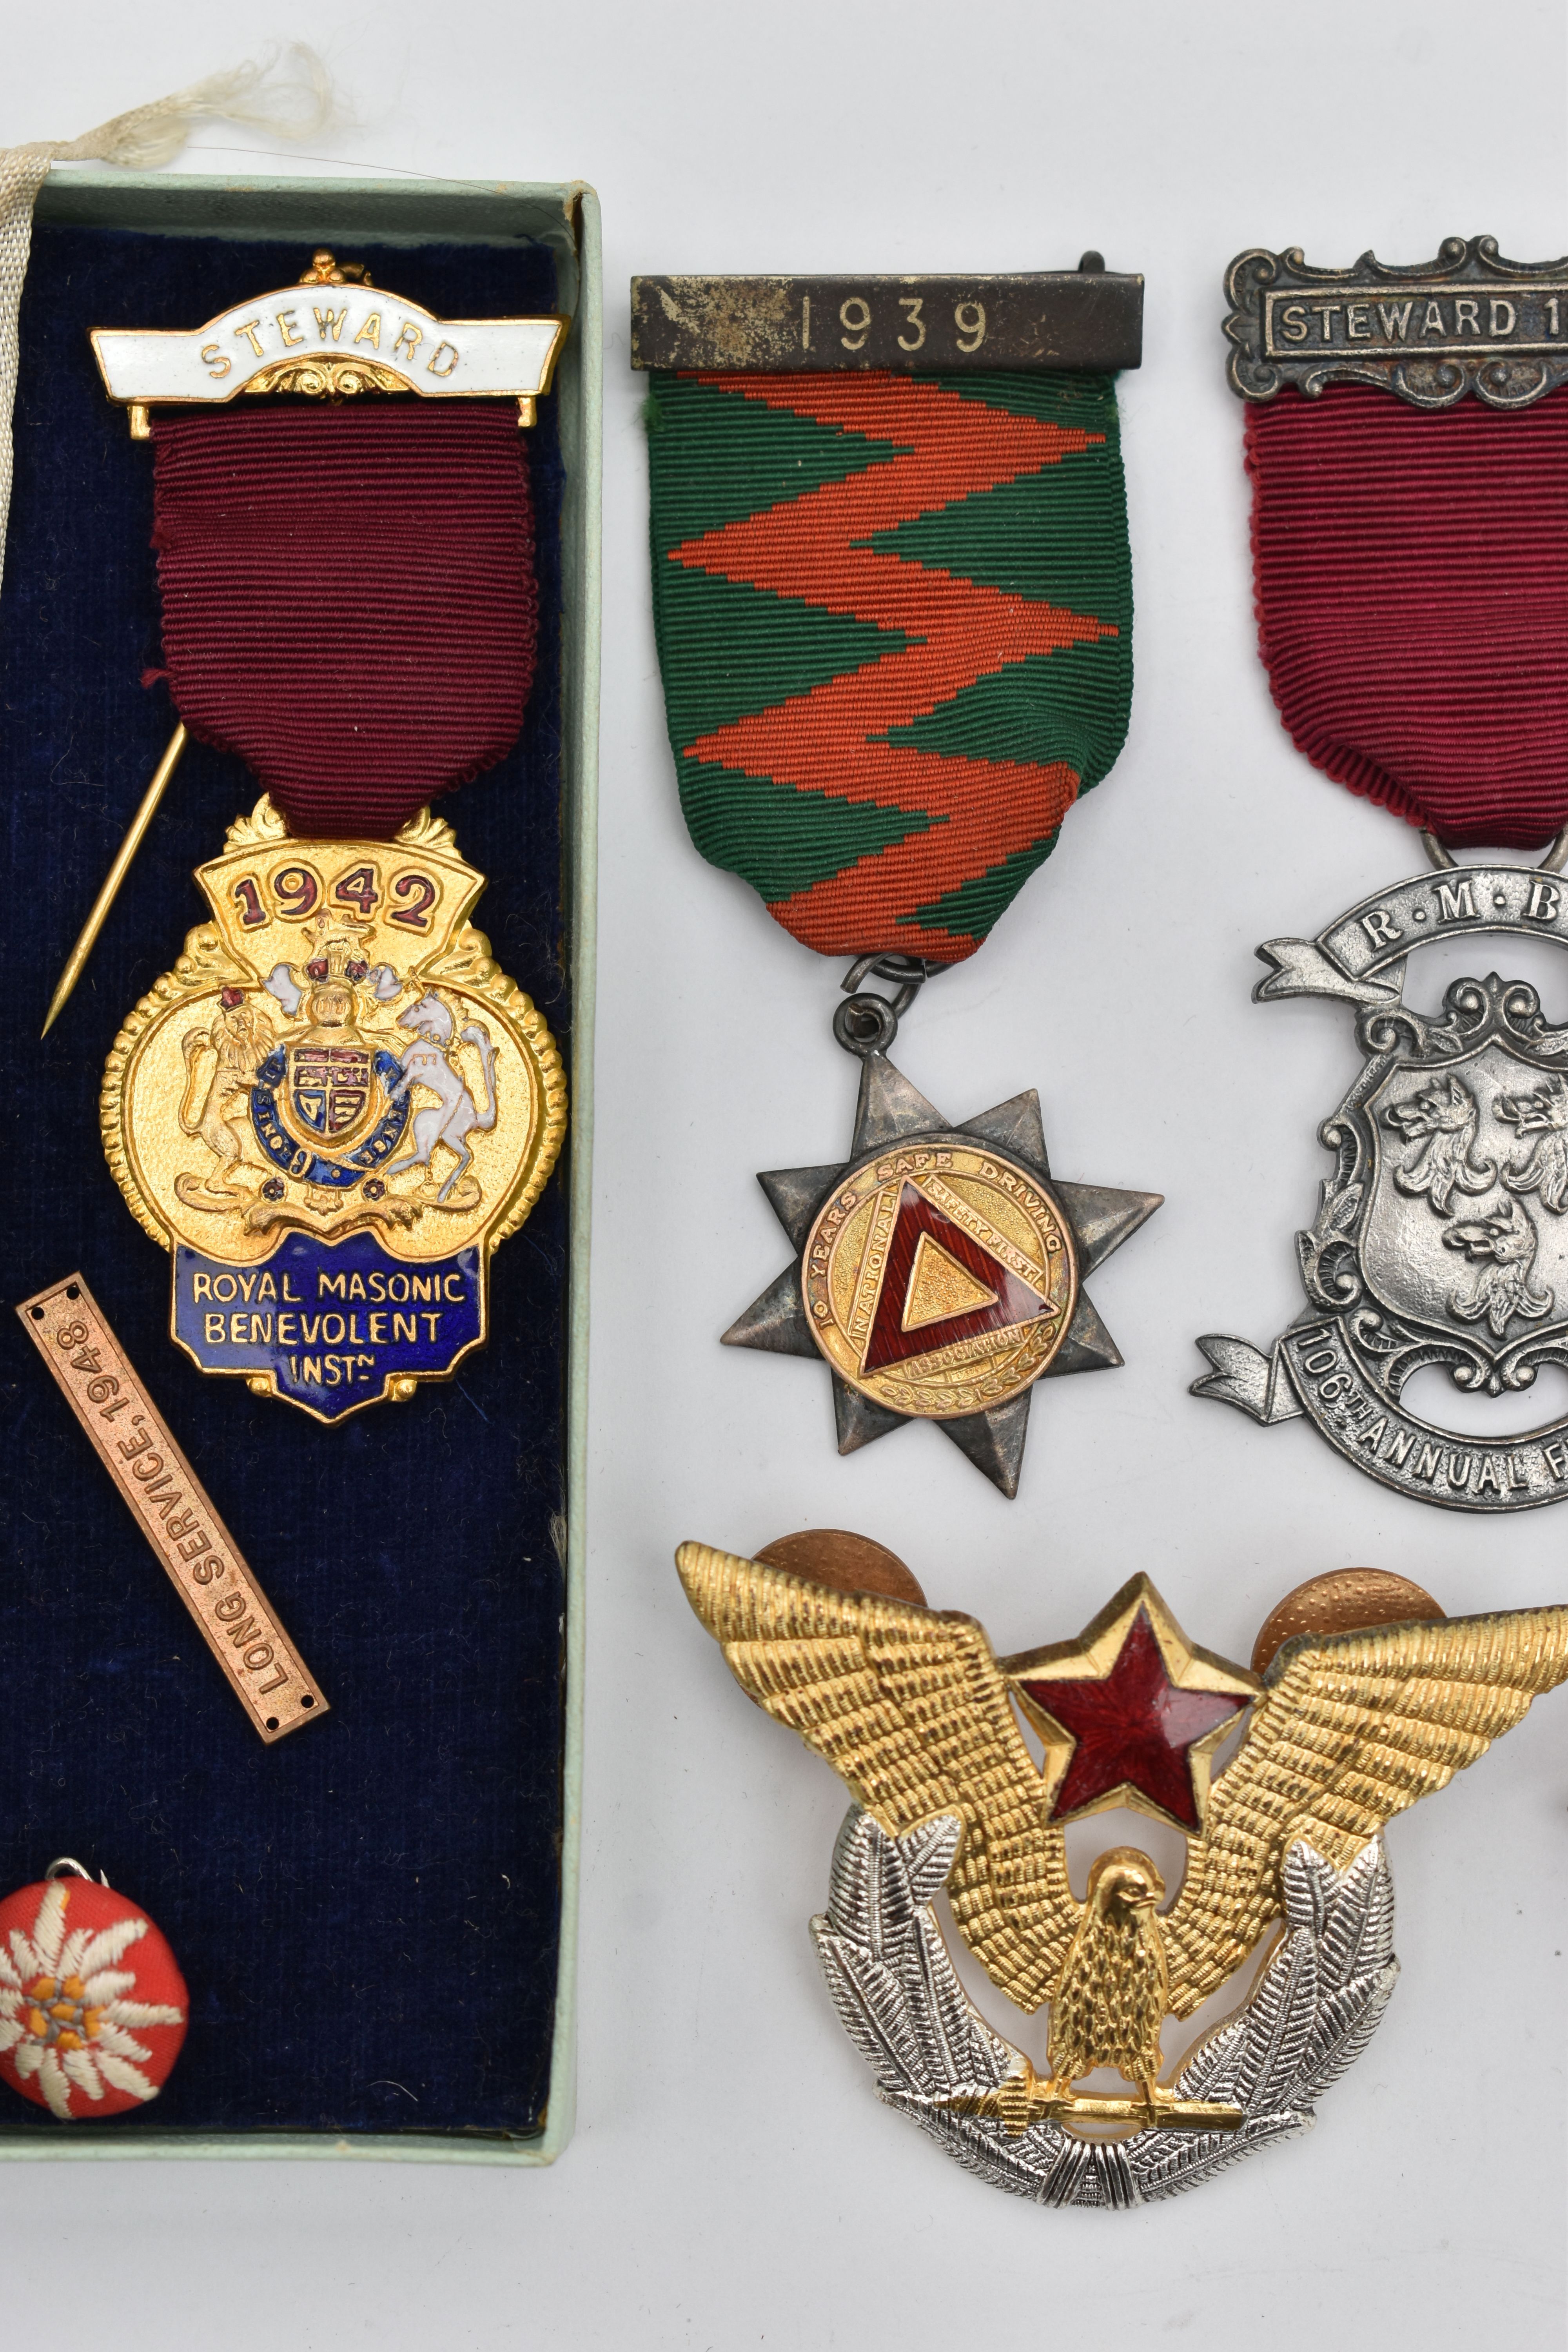 ASSSORTED MEDALS AND A MEDALLION, various medals including Masonic, The Royal Scots, etc some with - Image 2 of 6